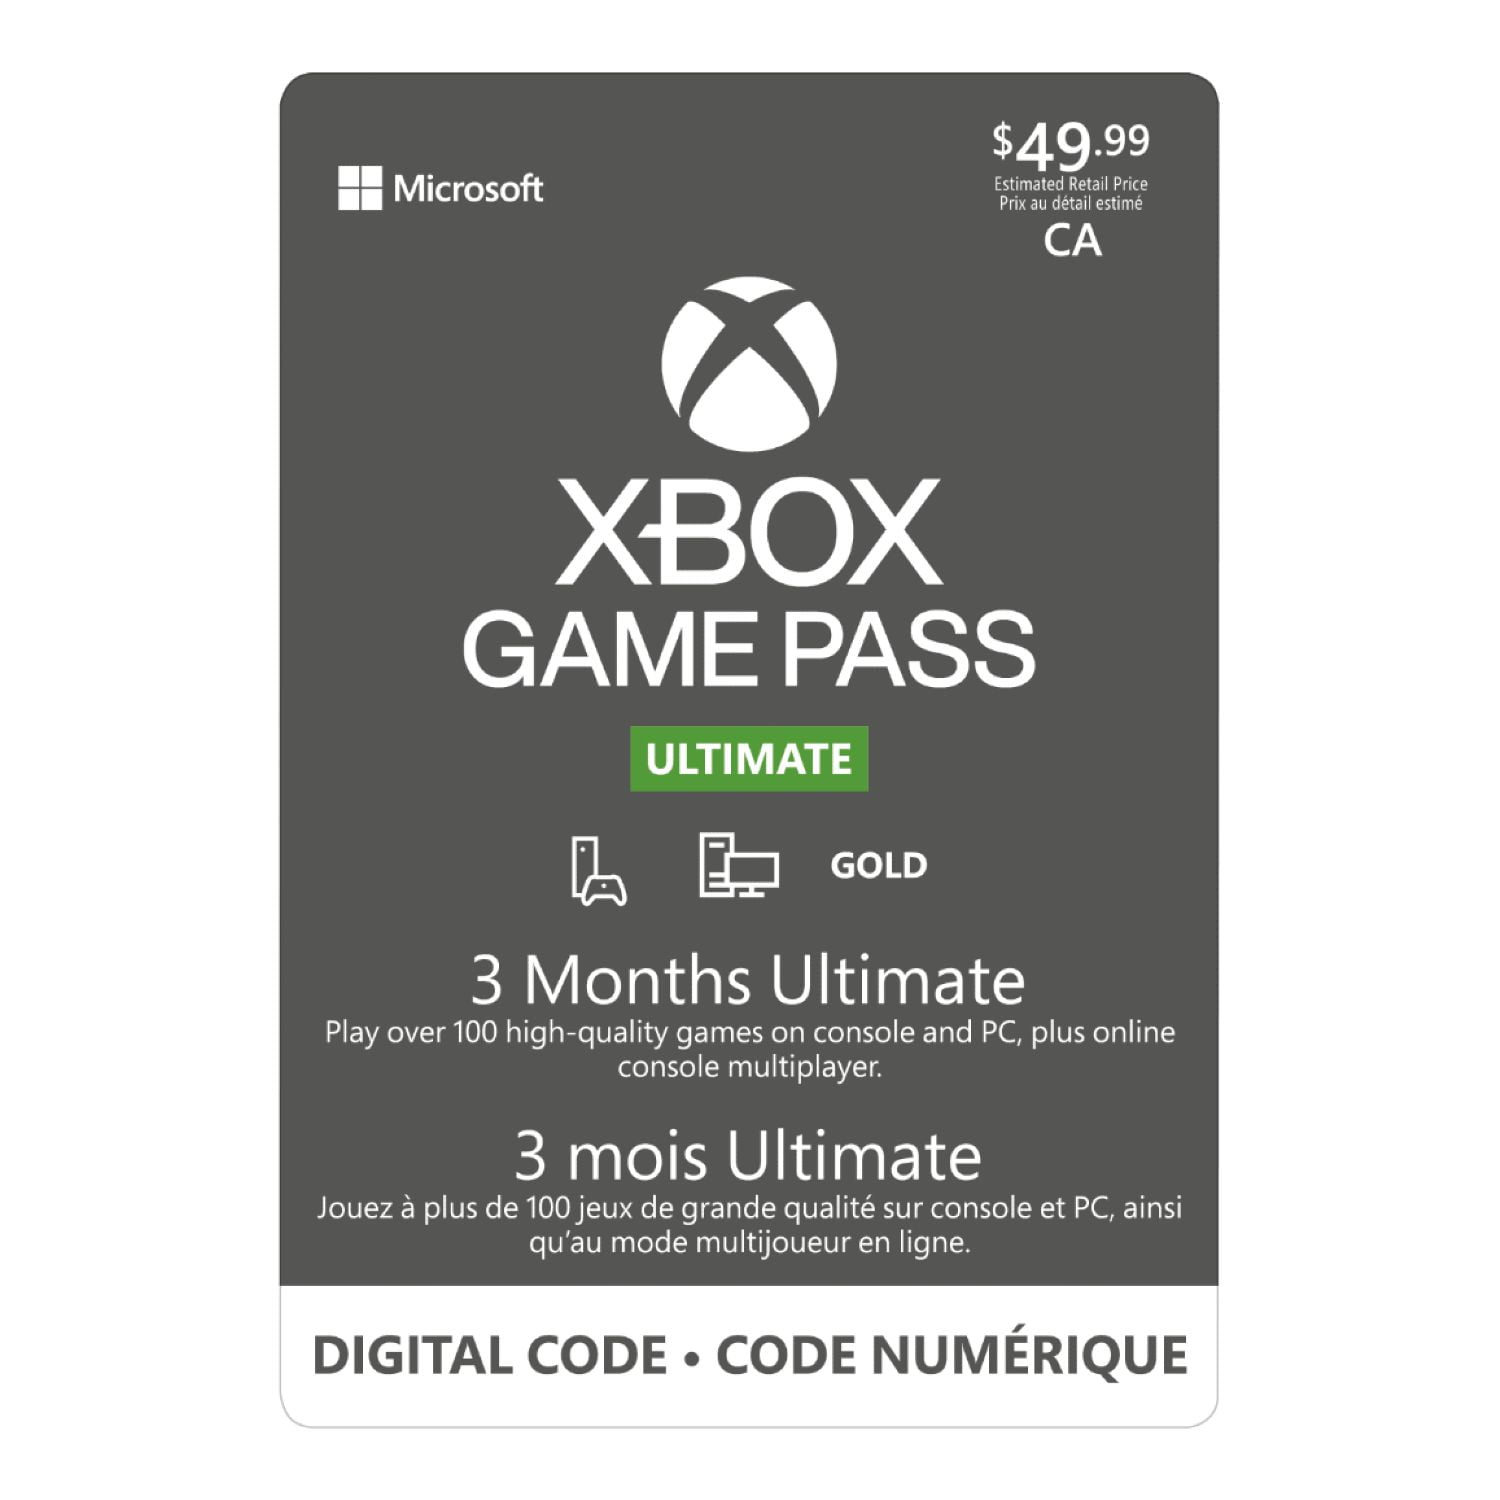 Xbox Game Pass Ultimate - 3 Months $49.99 Gift Card (Digital Code